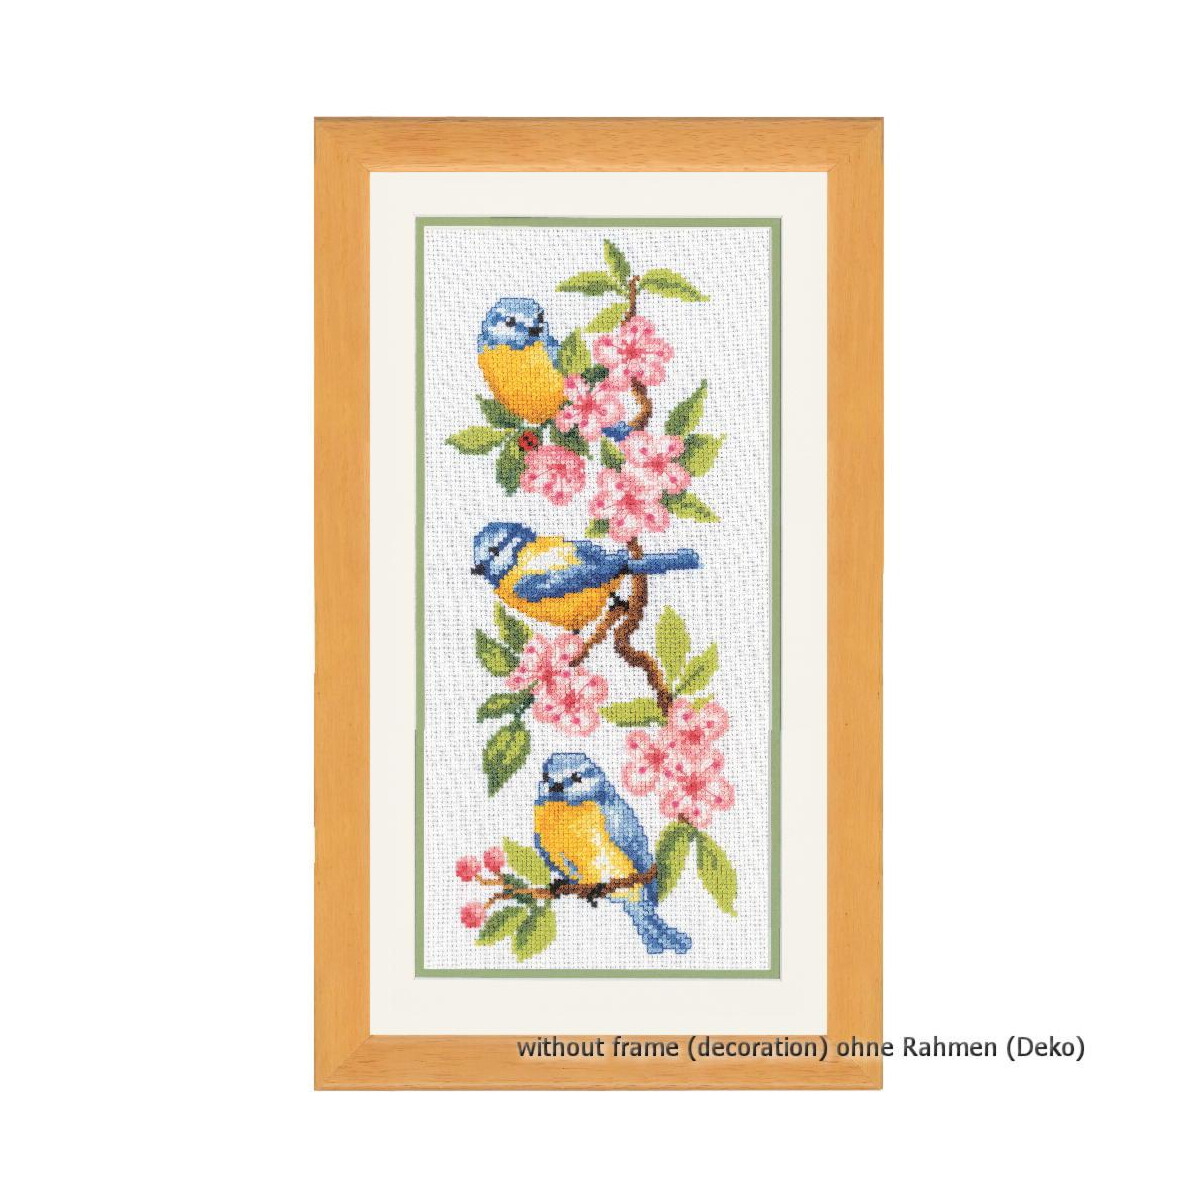 Vervaco counted cross stitch kit Birds on flowers, DIY